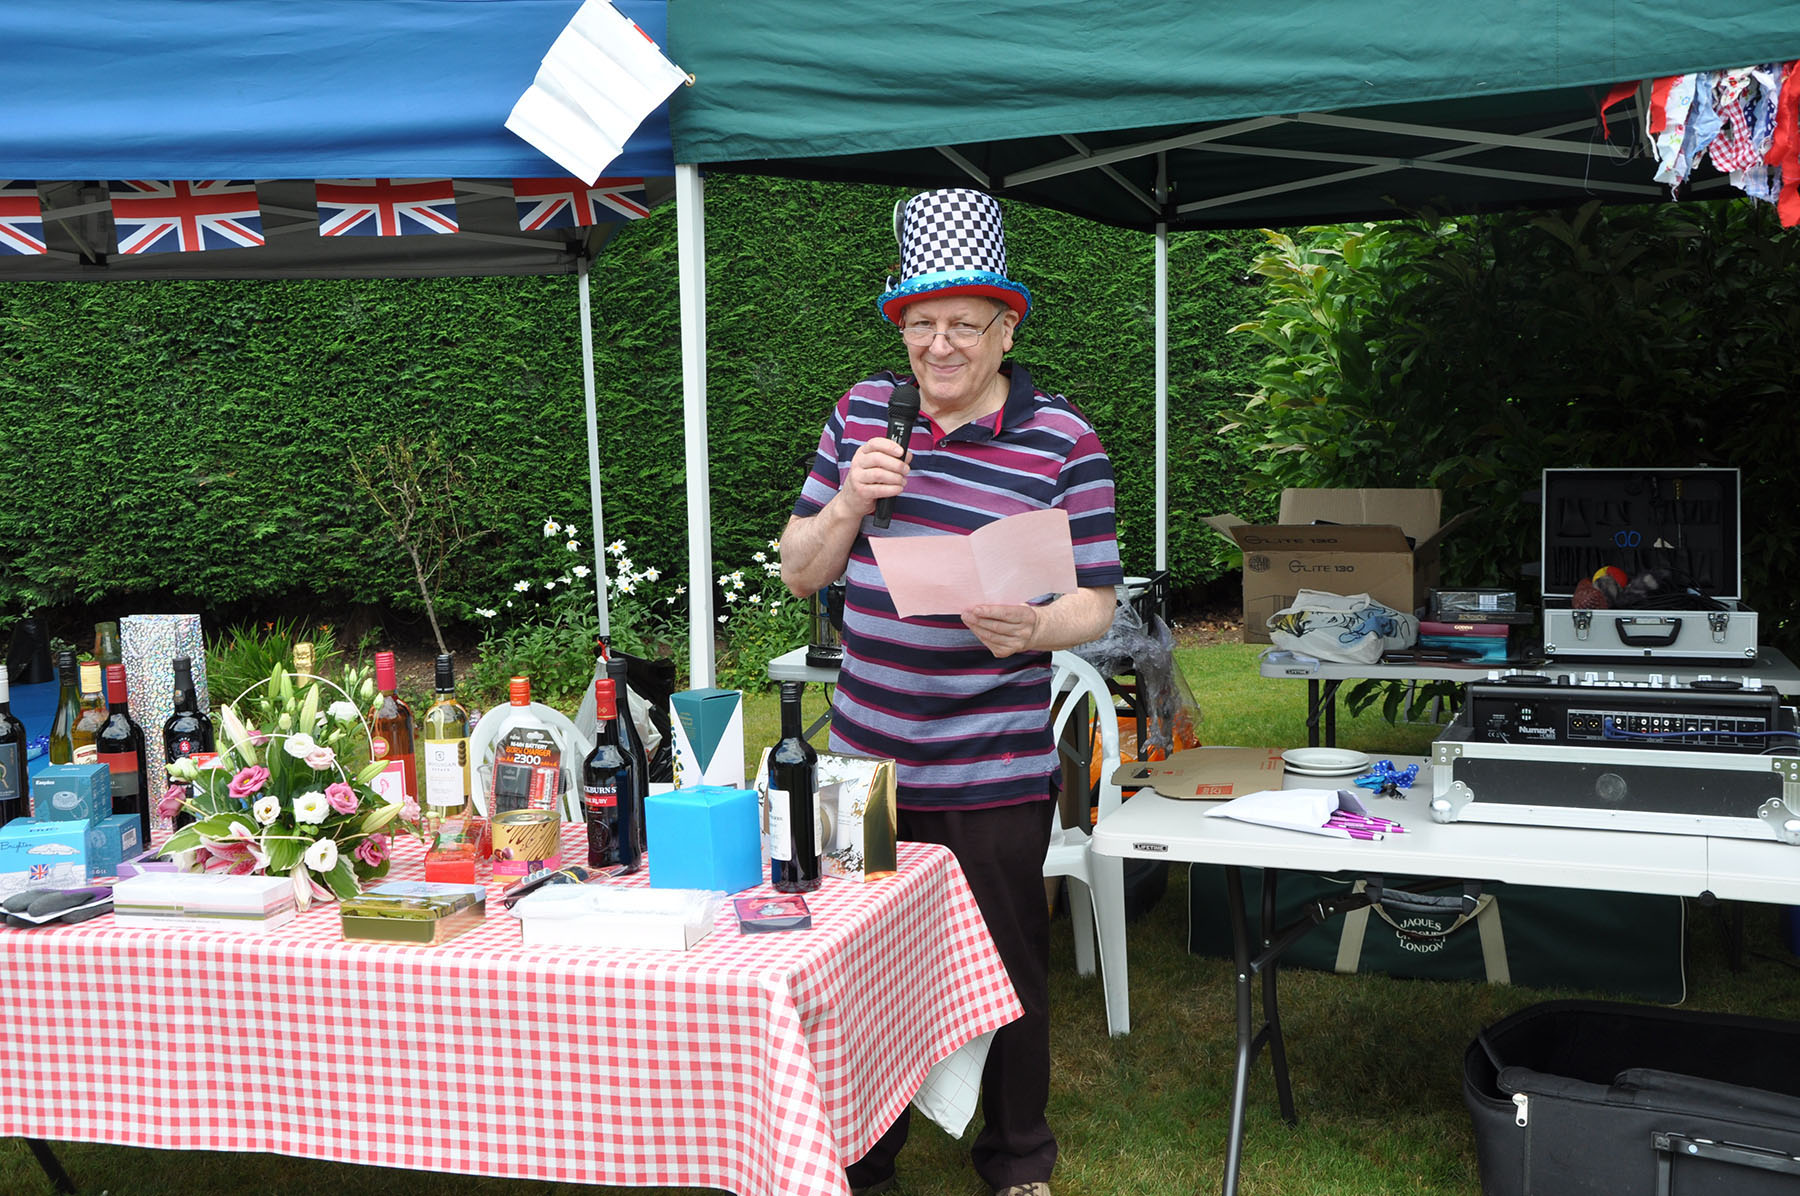 The Provincial Prior’s Mad Hatter’s Tea Party